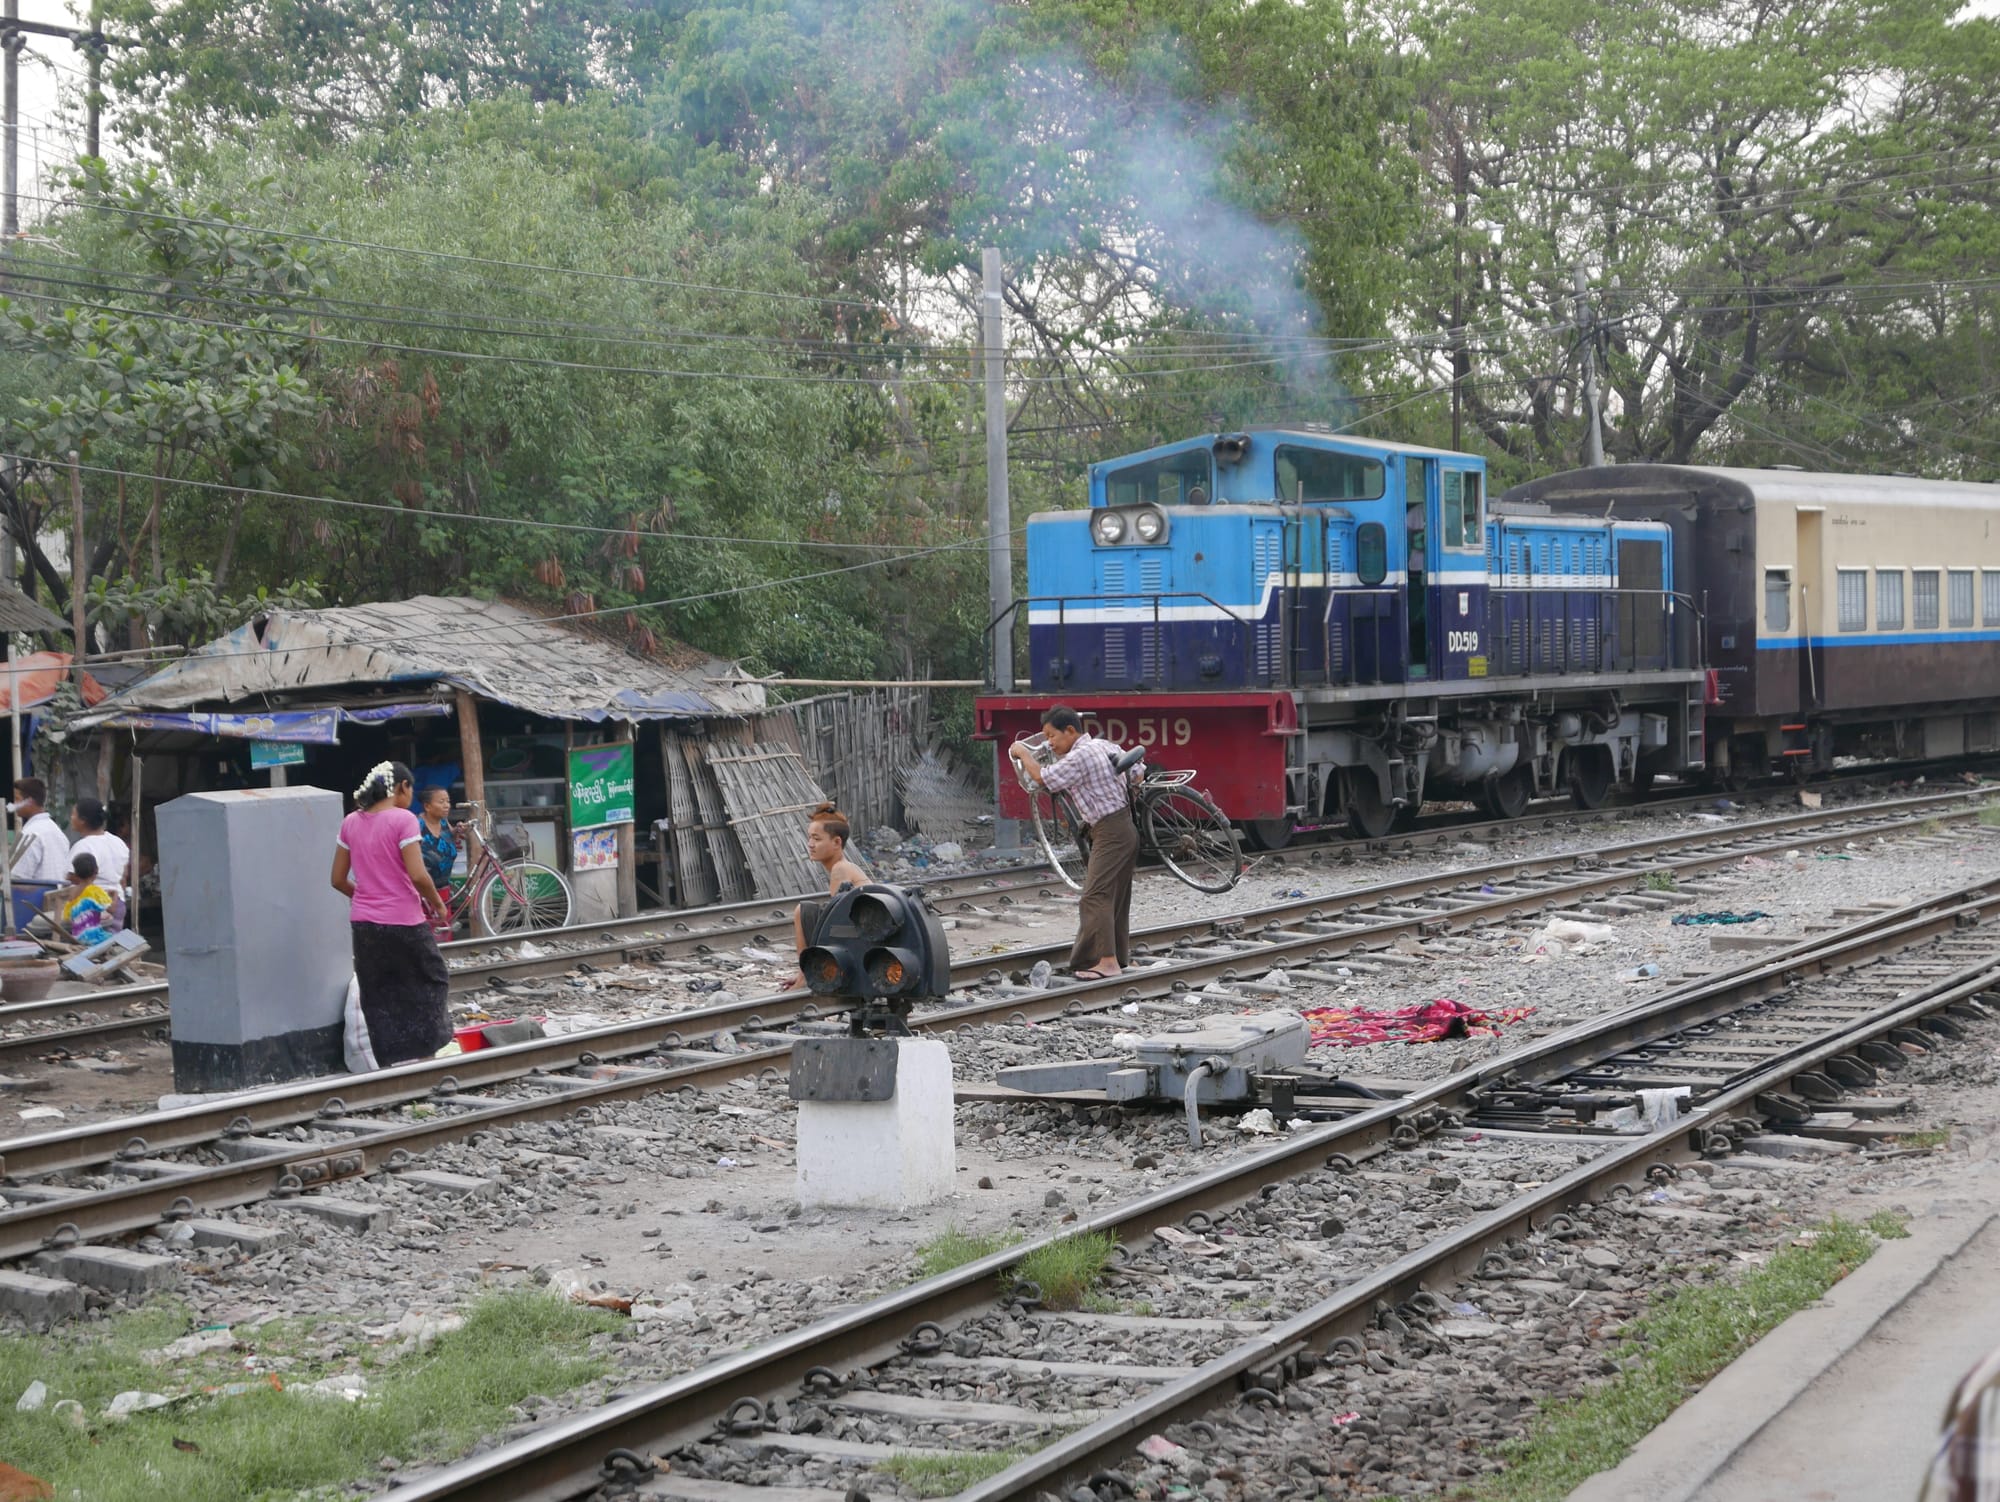 Photo by Author — local train tracks in Mandalay